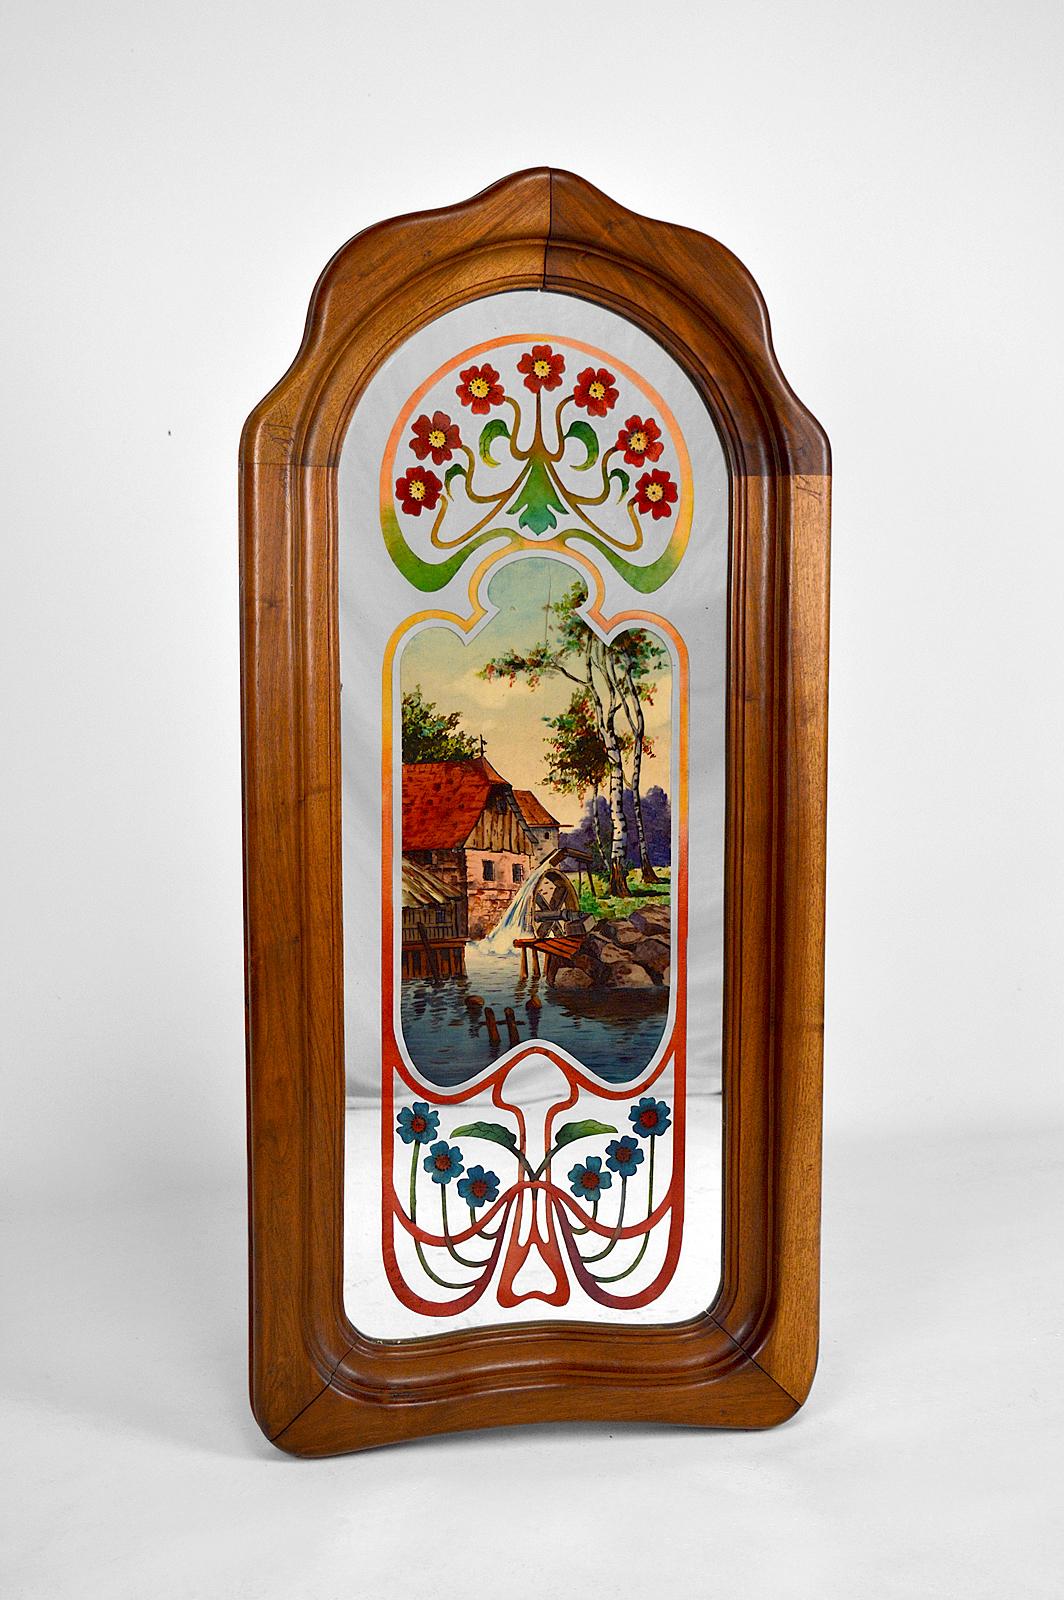 Beautiful Art Nouveau mirror with molded walnut frame.
The mirror is painted under glass with floral motifs and a bucolic scene: a watermill in the countryside.

Art Nouveau / Ecole de Nancy (School of Nancy), France, circa 1900.

Good